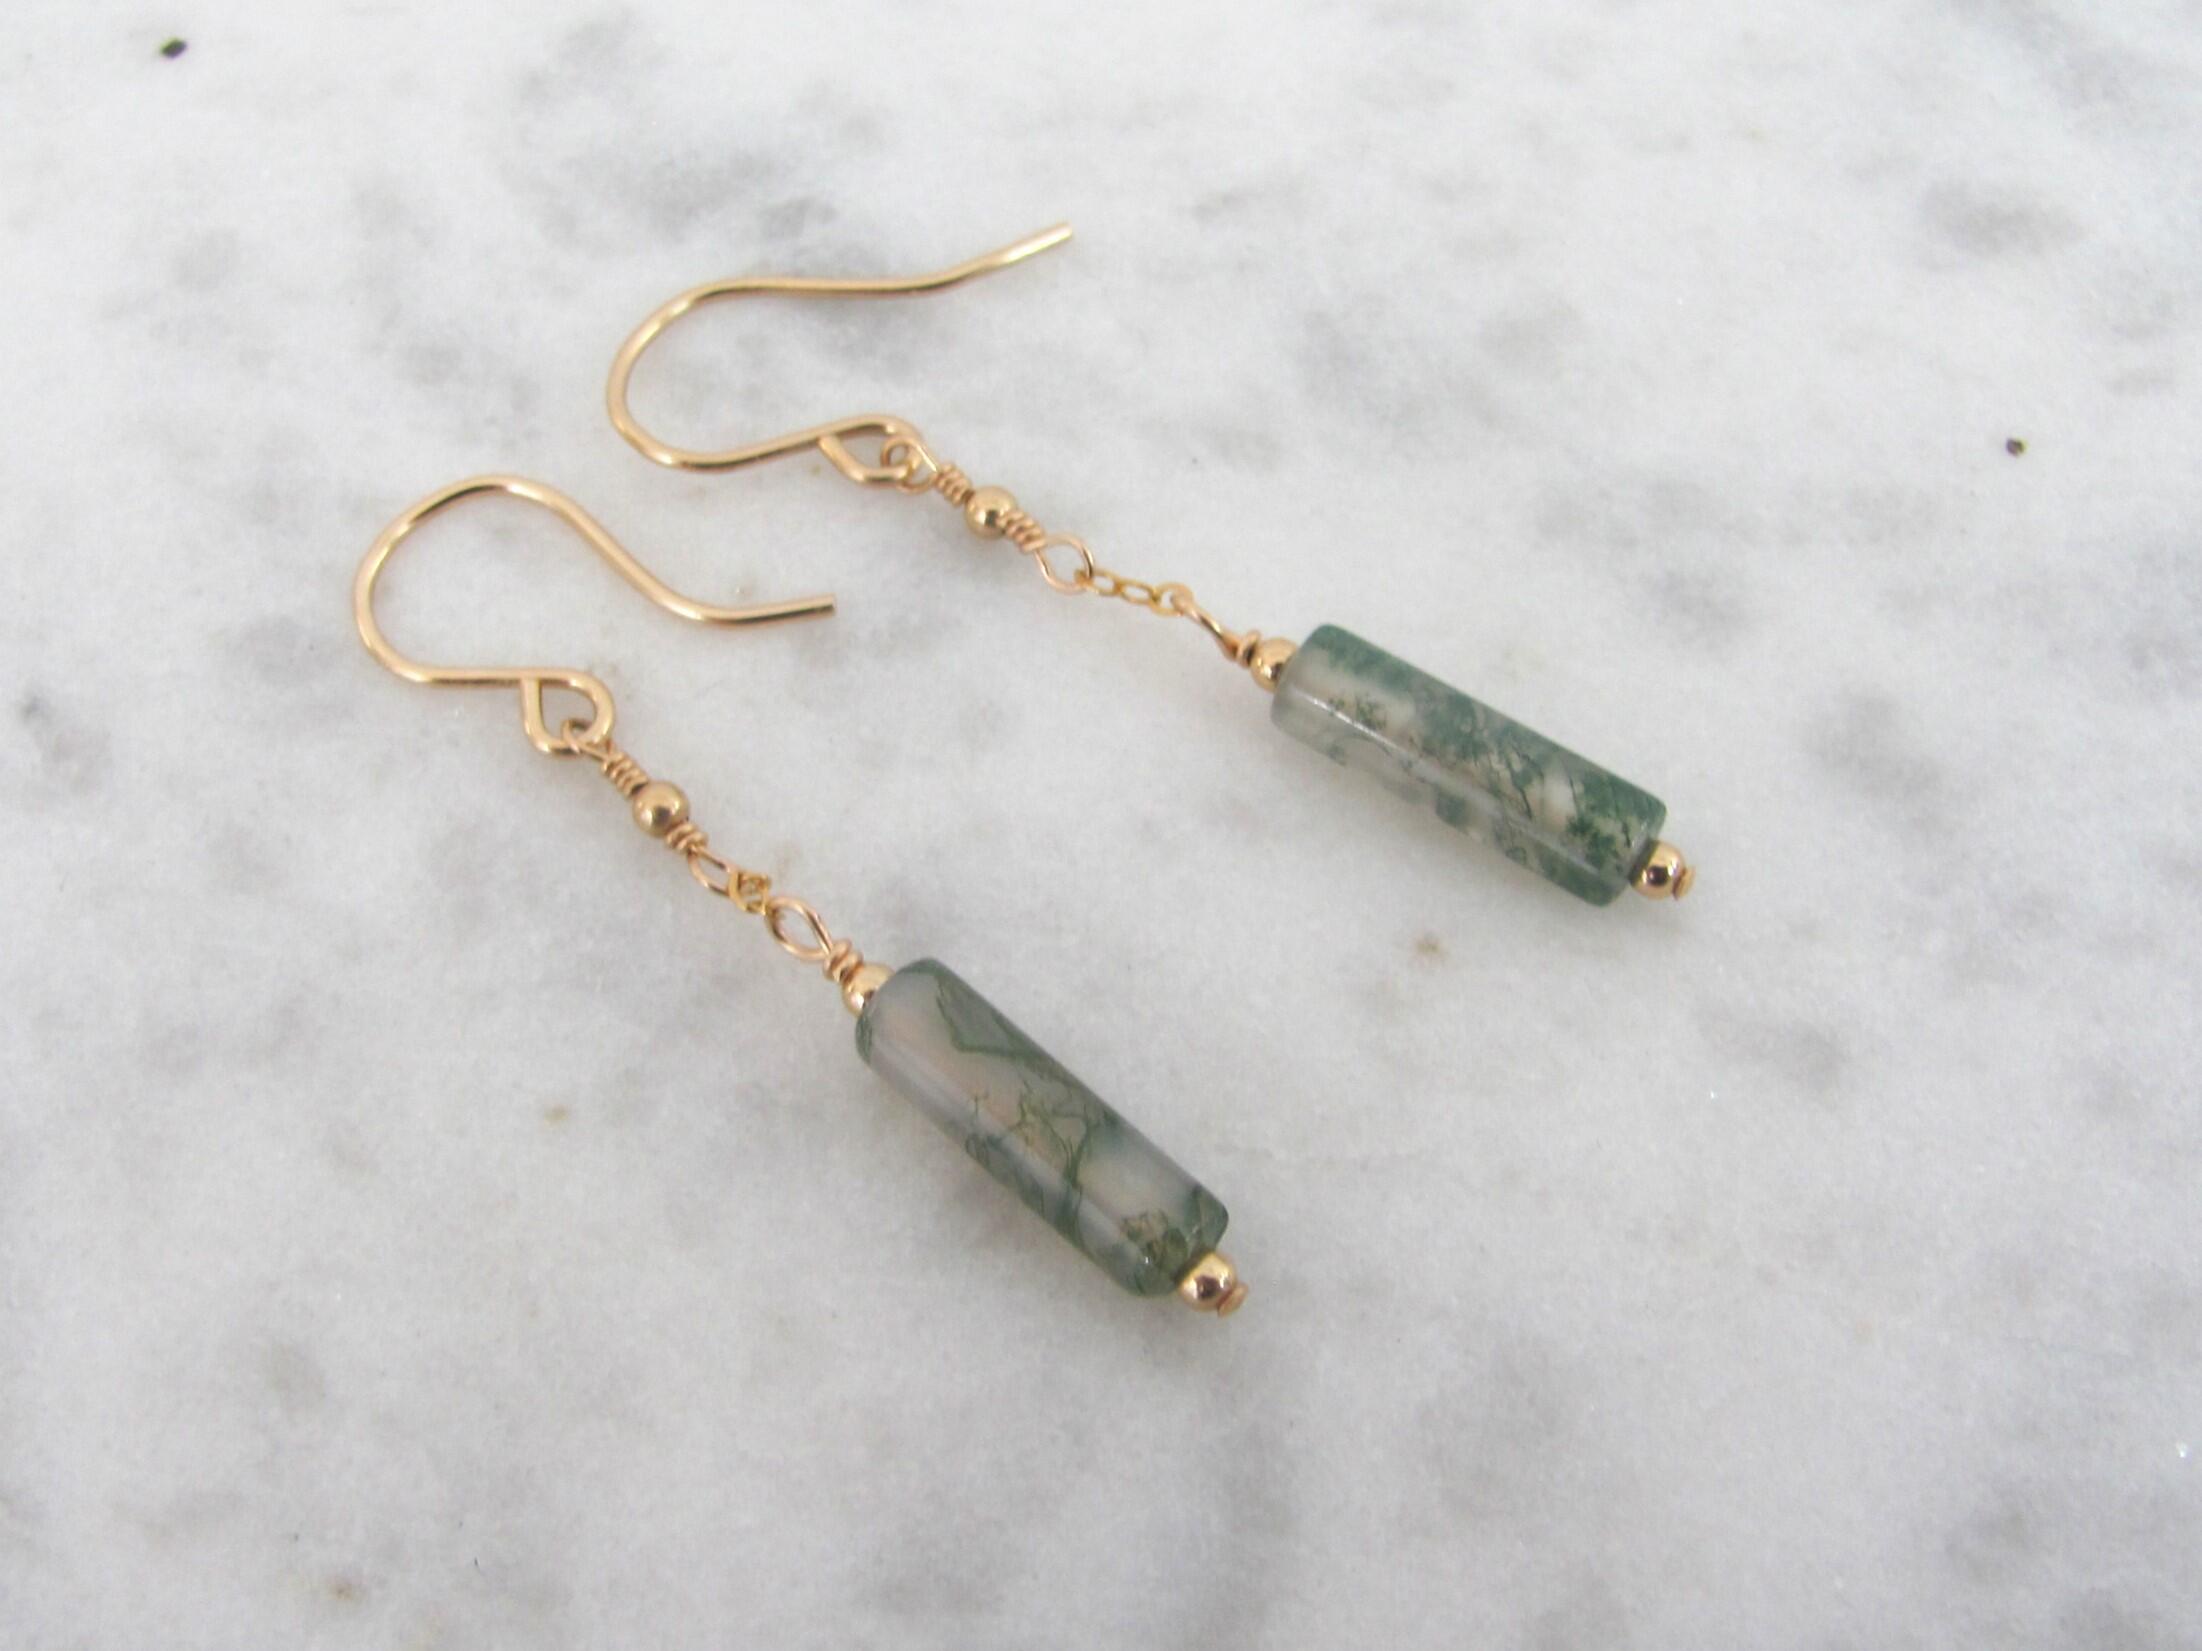 Moss Agate Necklace and Earring Set, 14K Gold Filled